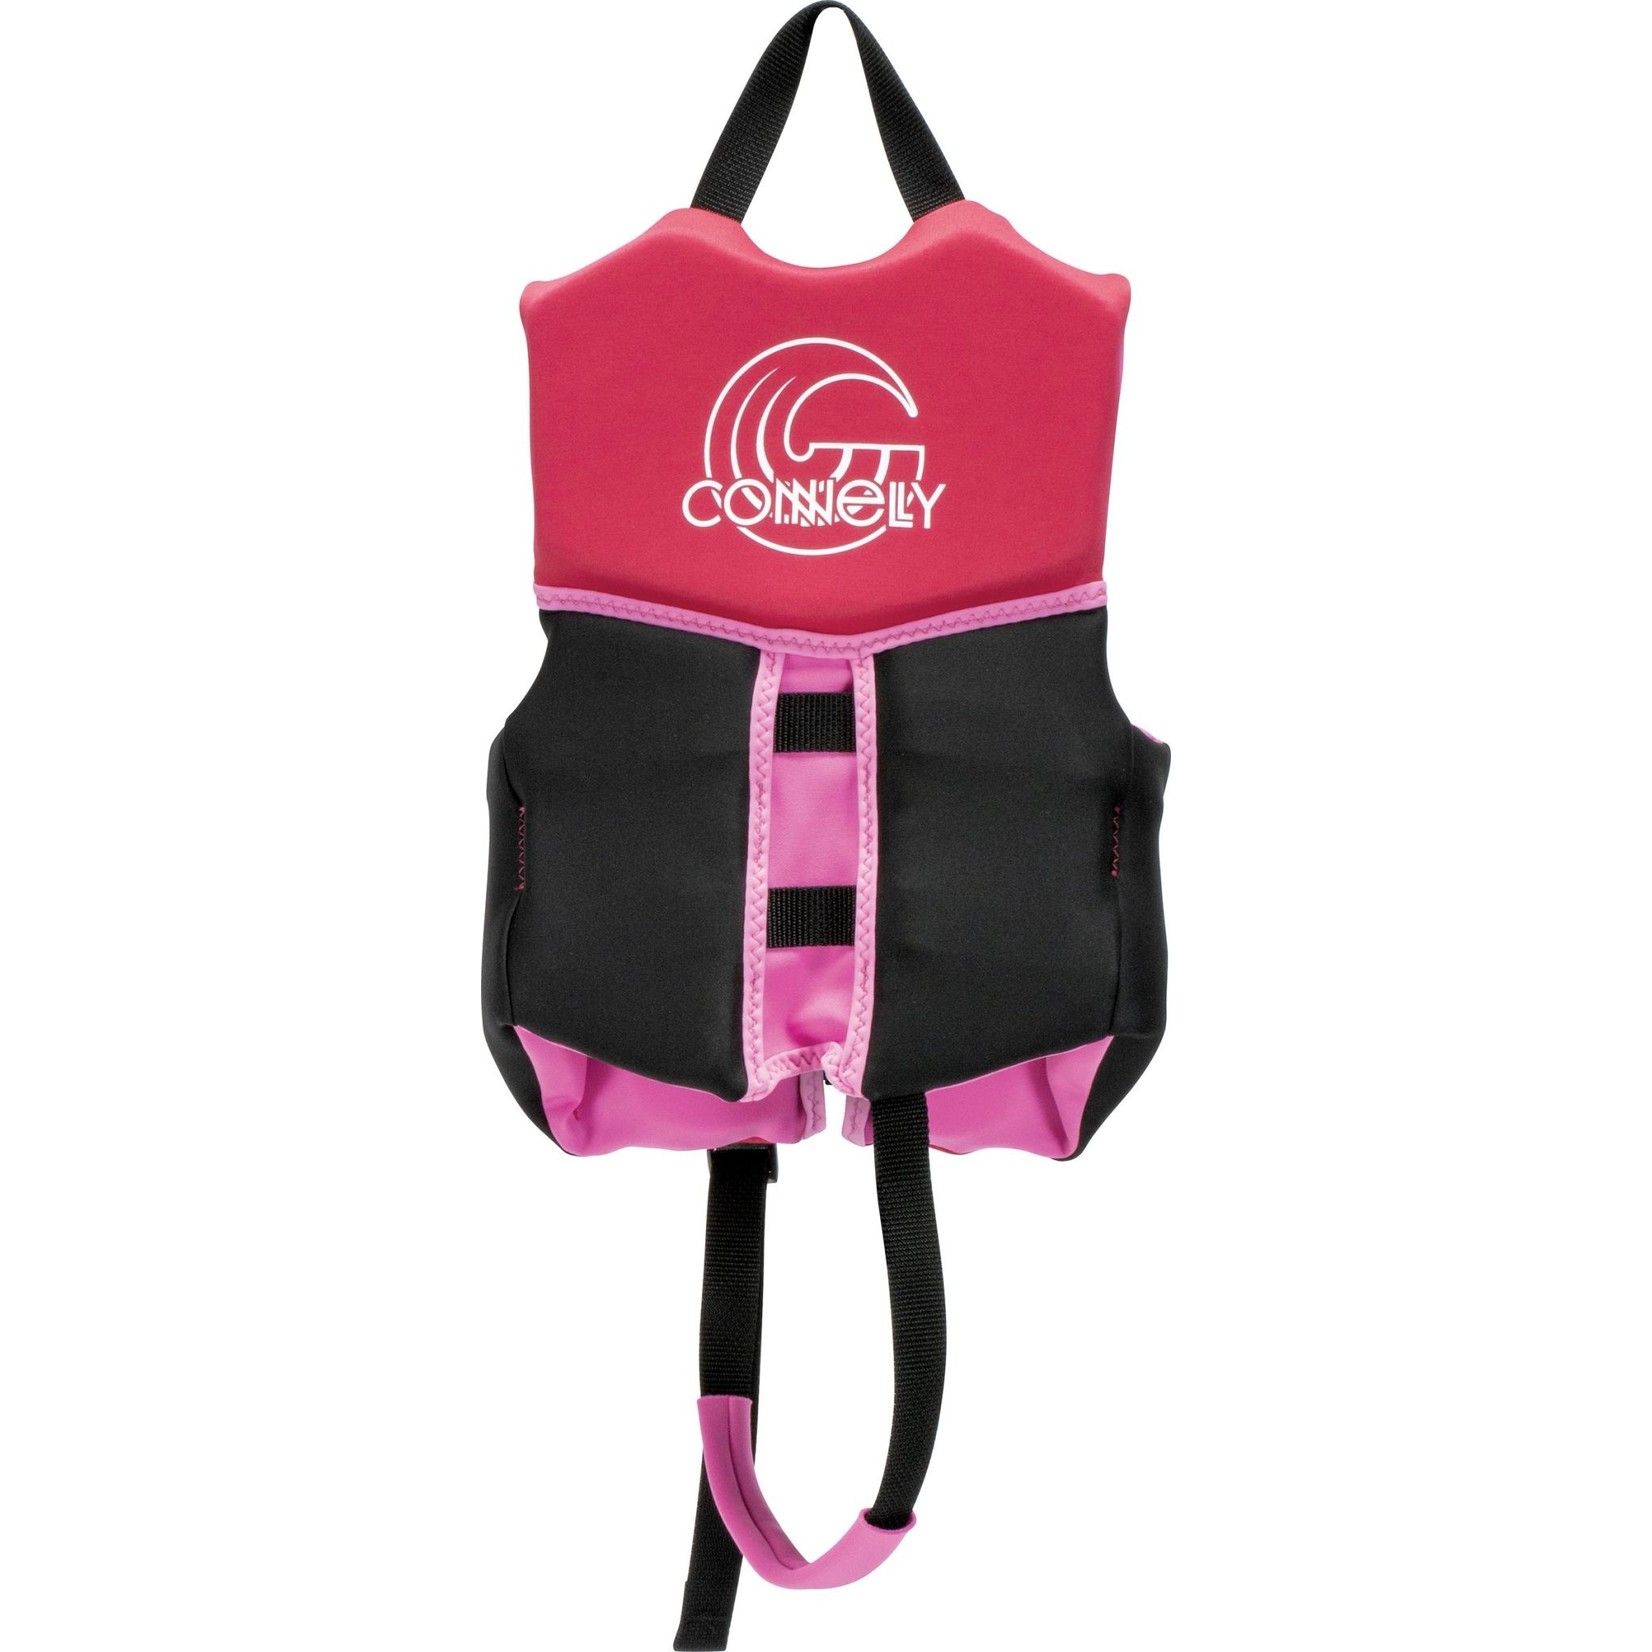 Connelly Girls Classic Child Neo Vest